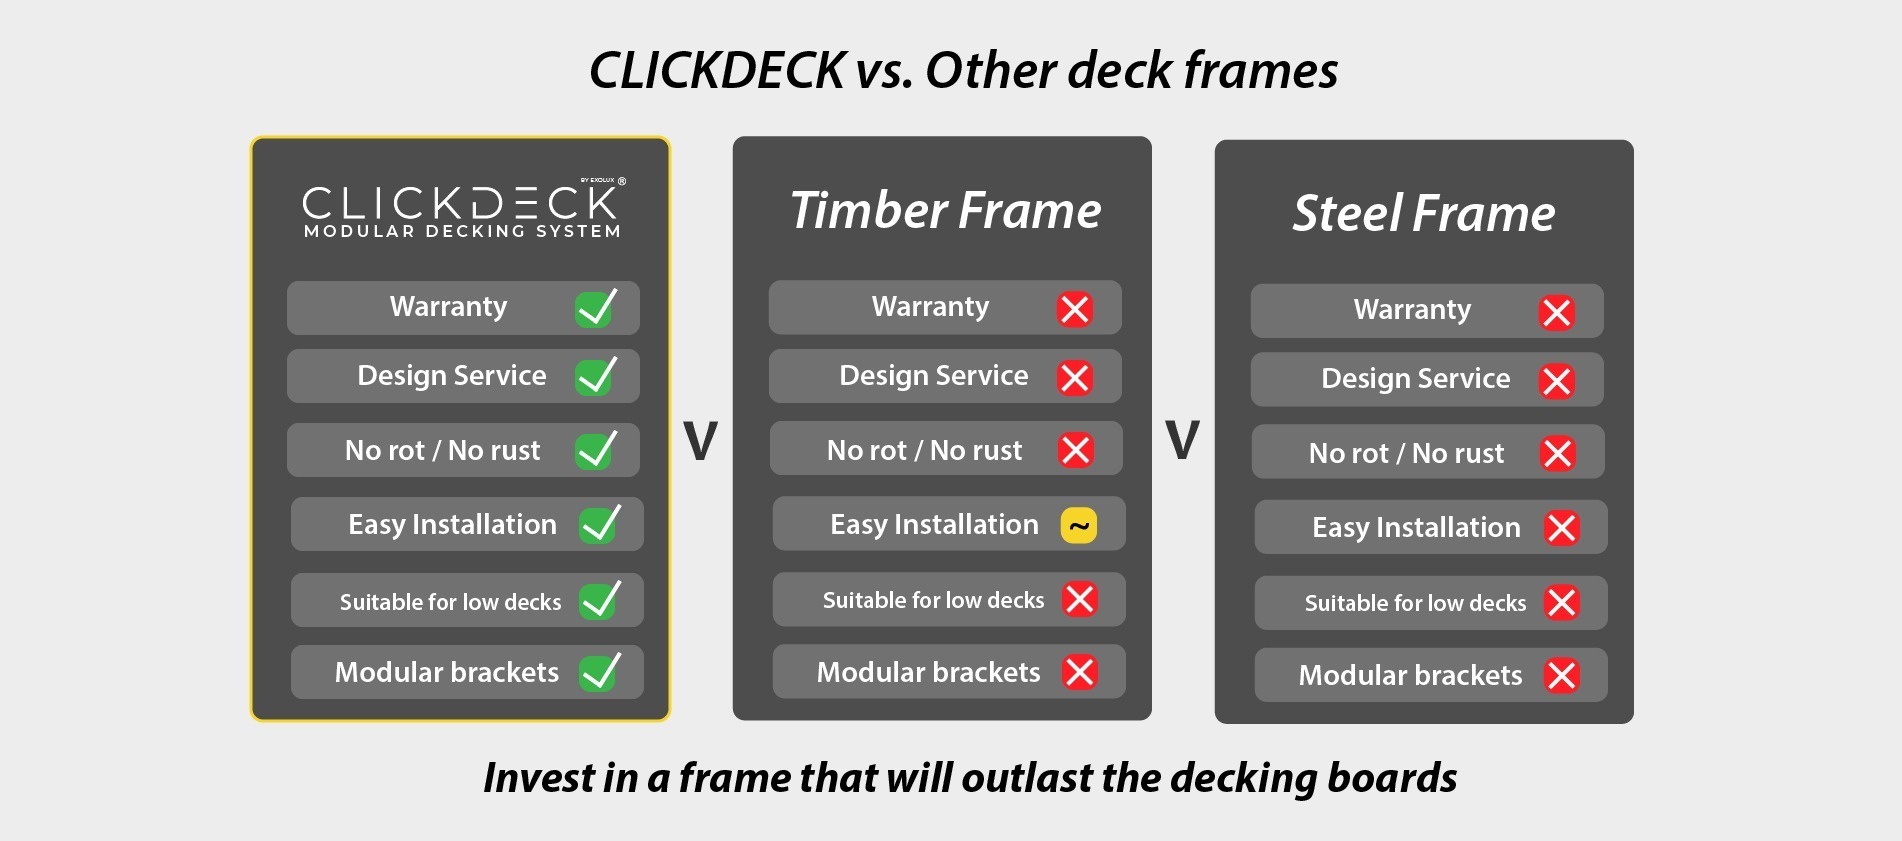 Comparison table between Clickdeck modular decking, timber decking and steel decking frames